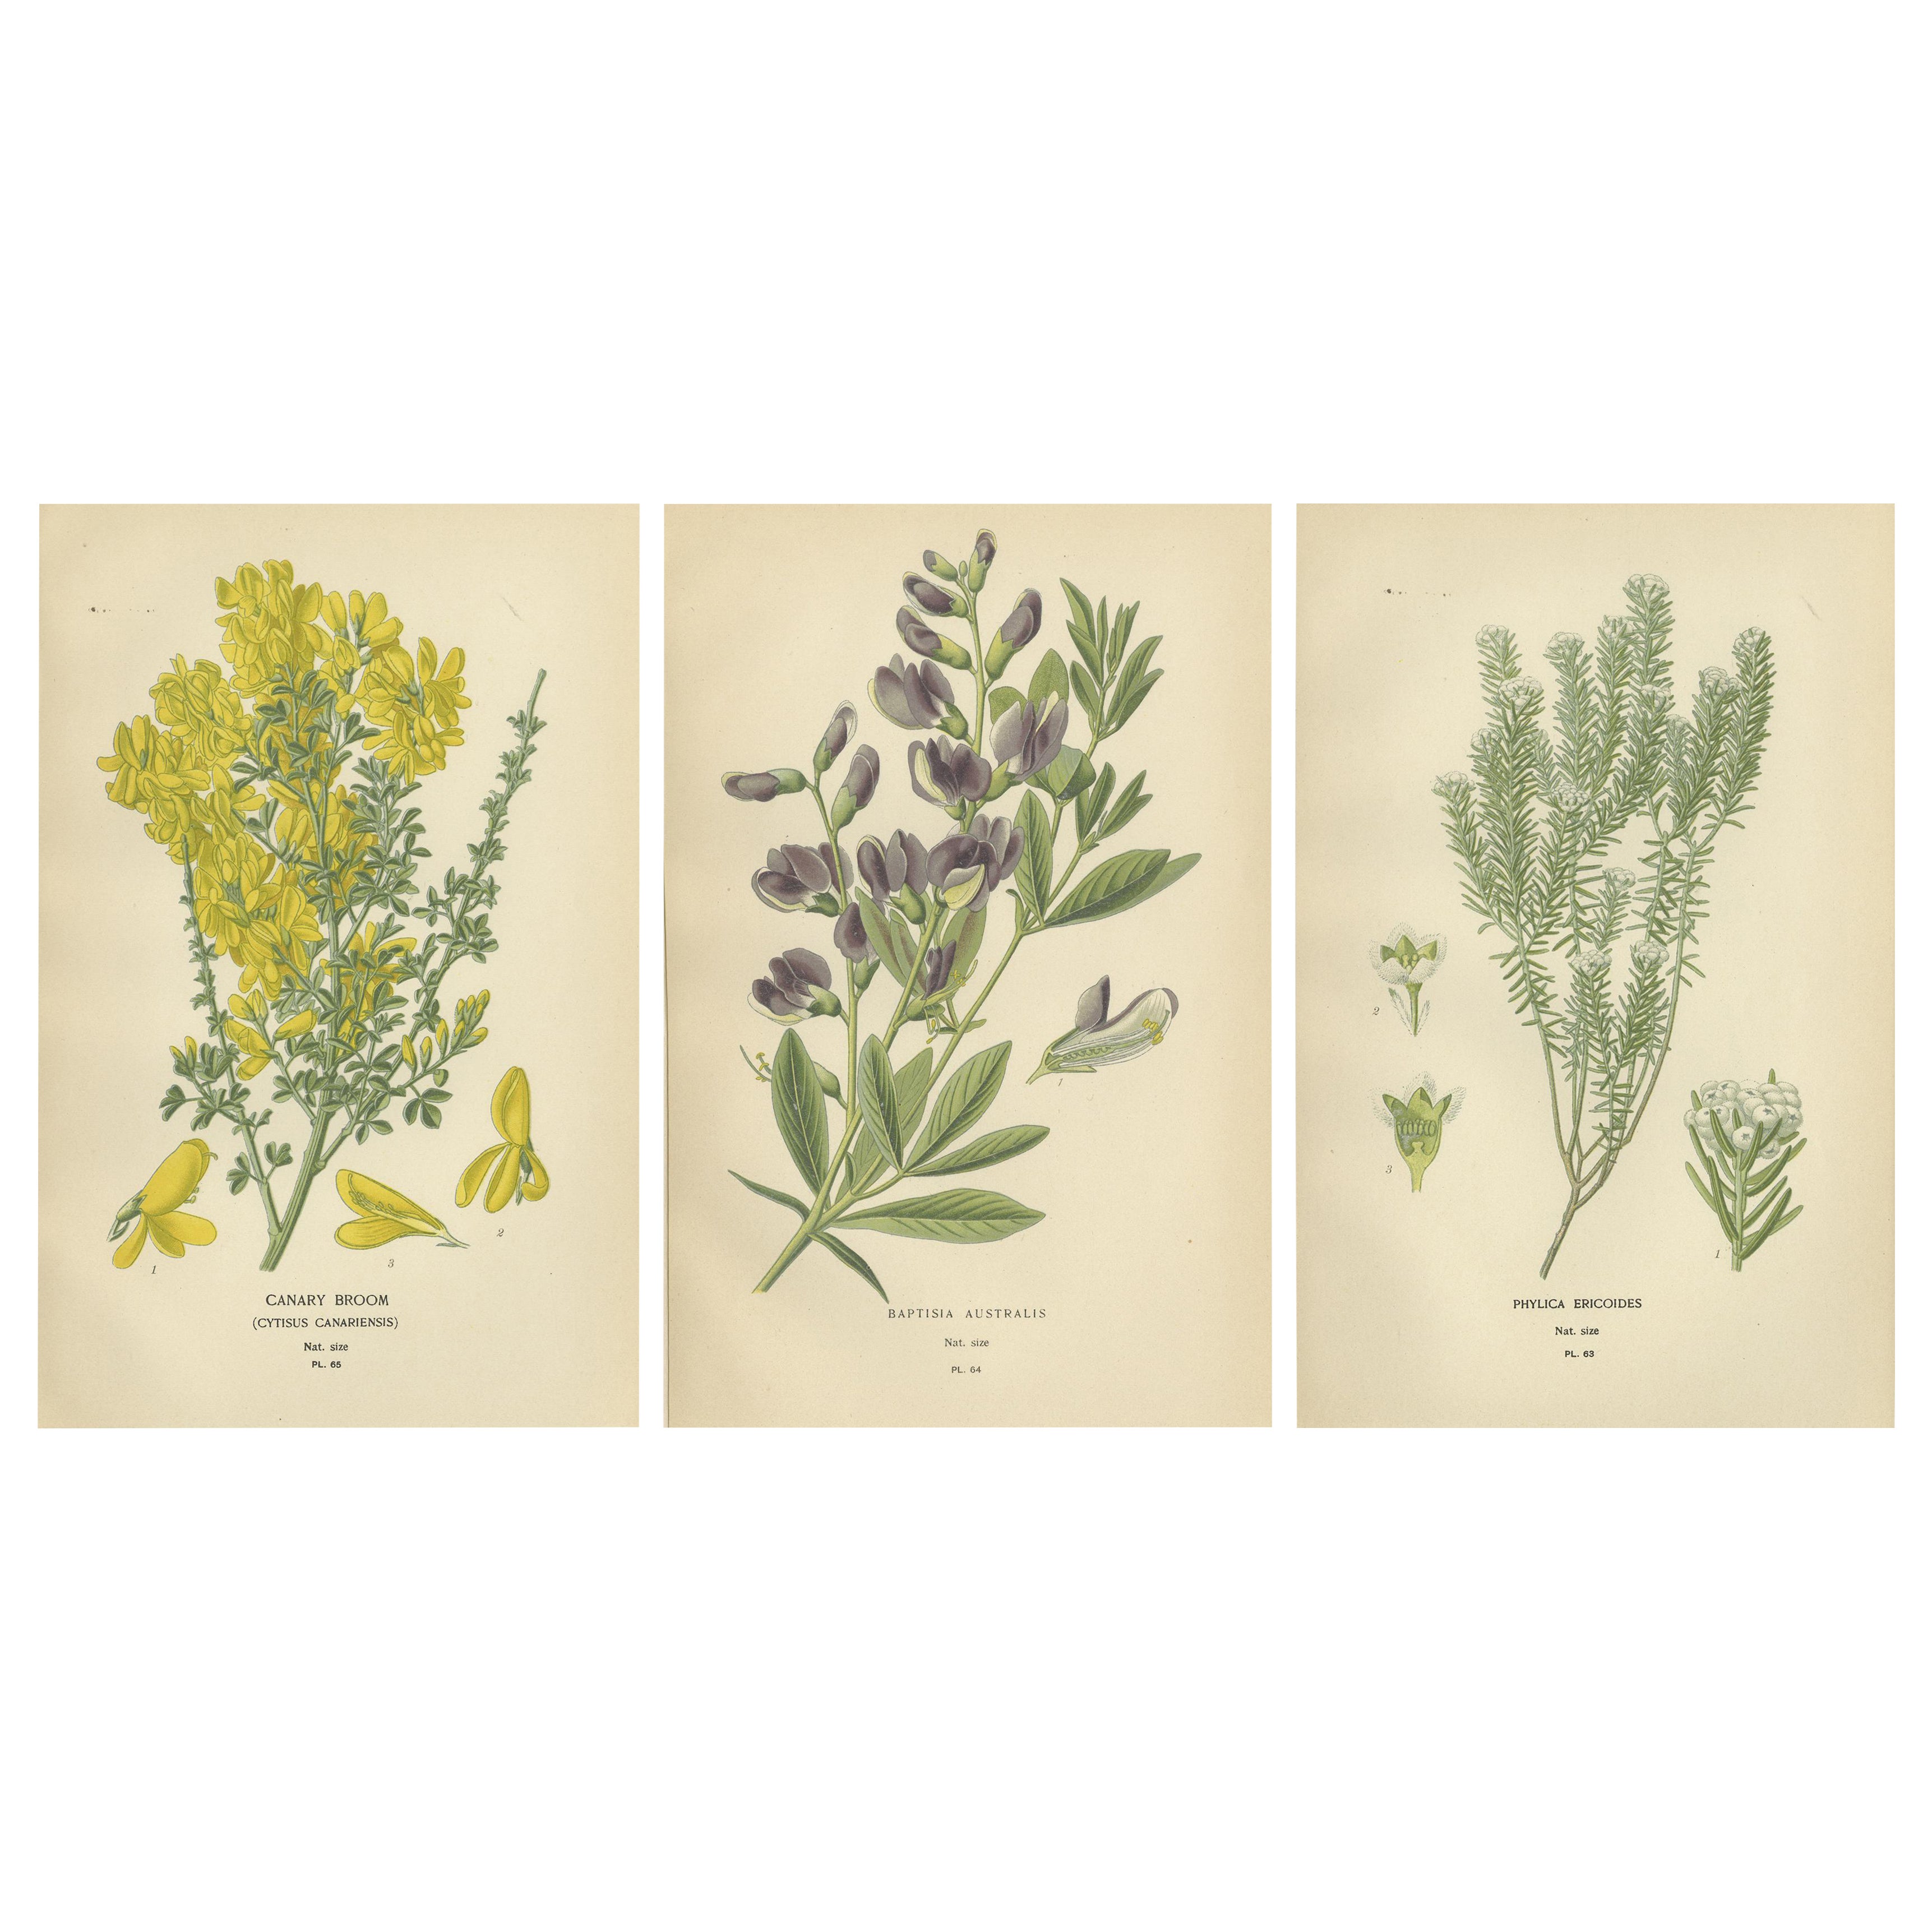 Blossoms of Elegance: A Triptych of 1896 Botanical Art